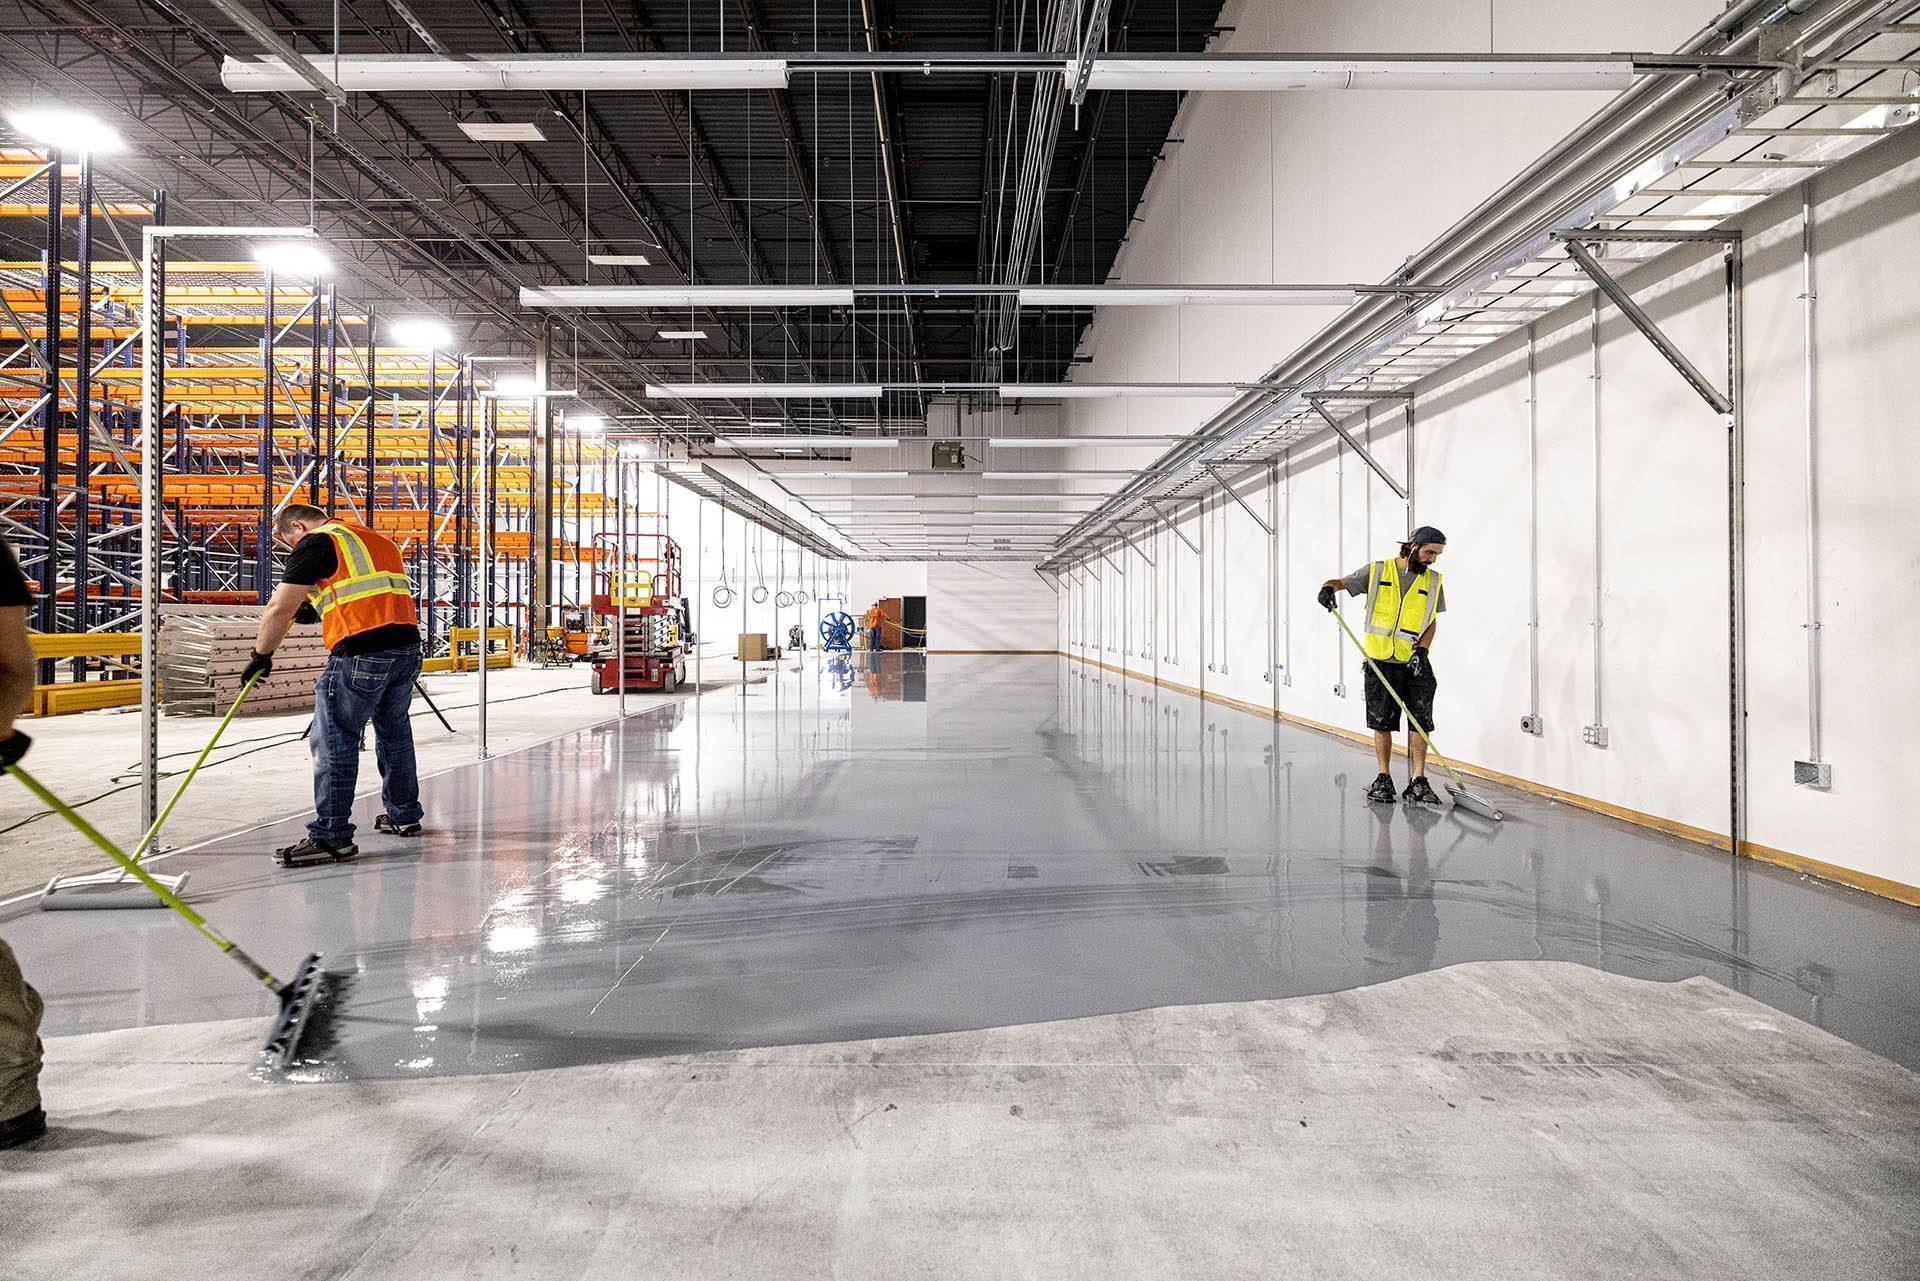 Electrostatic Dissipative Floors For Data Centers